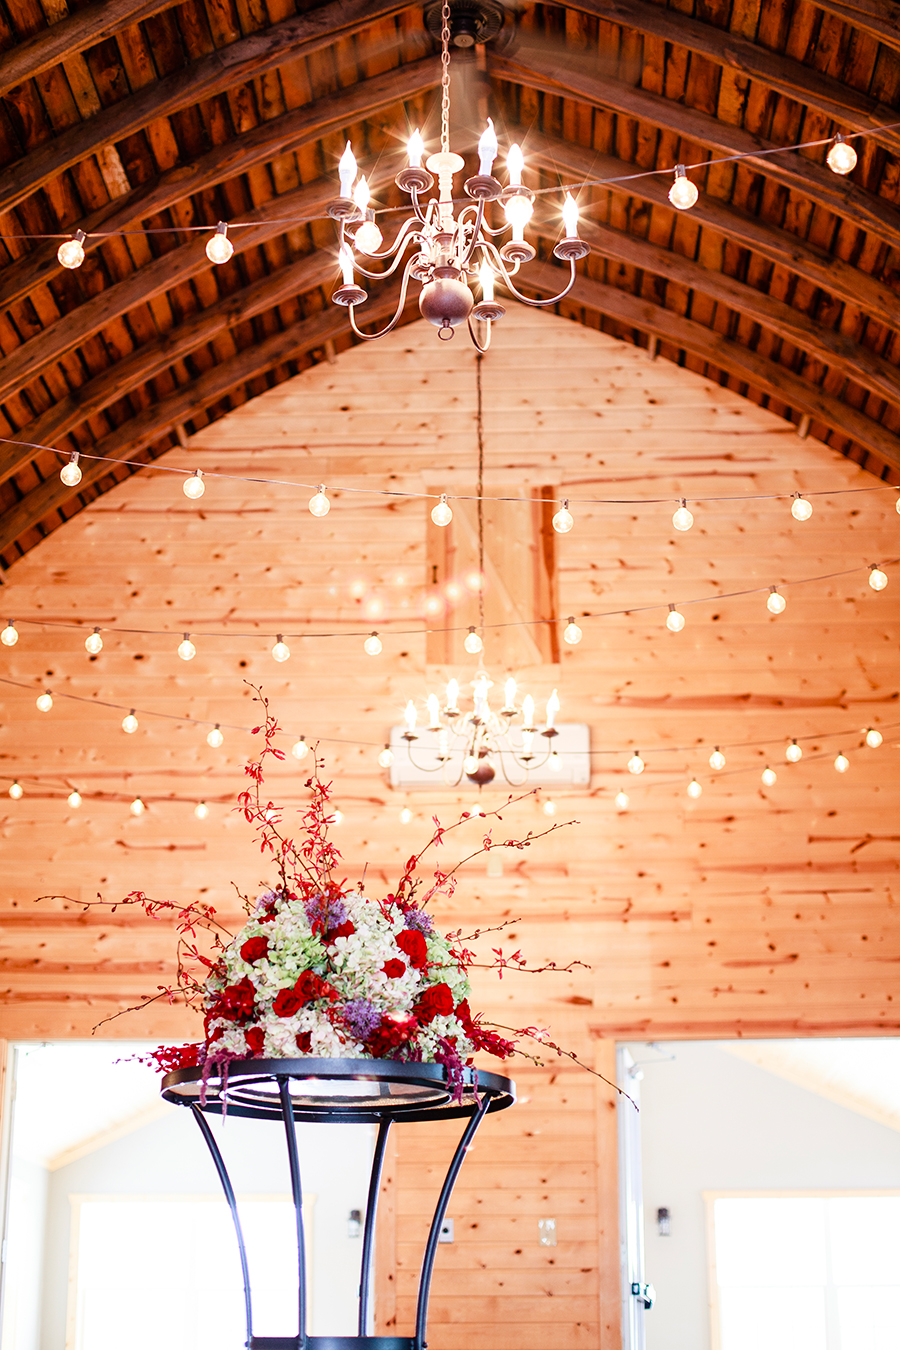 Floral bouquet and fairy lights at the Rustic Oaks, Moorhead Minnesota, USA